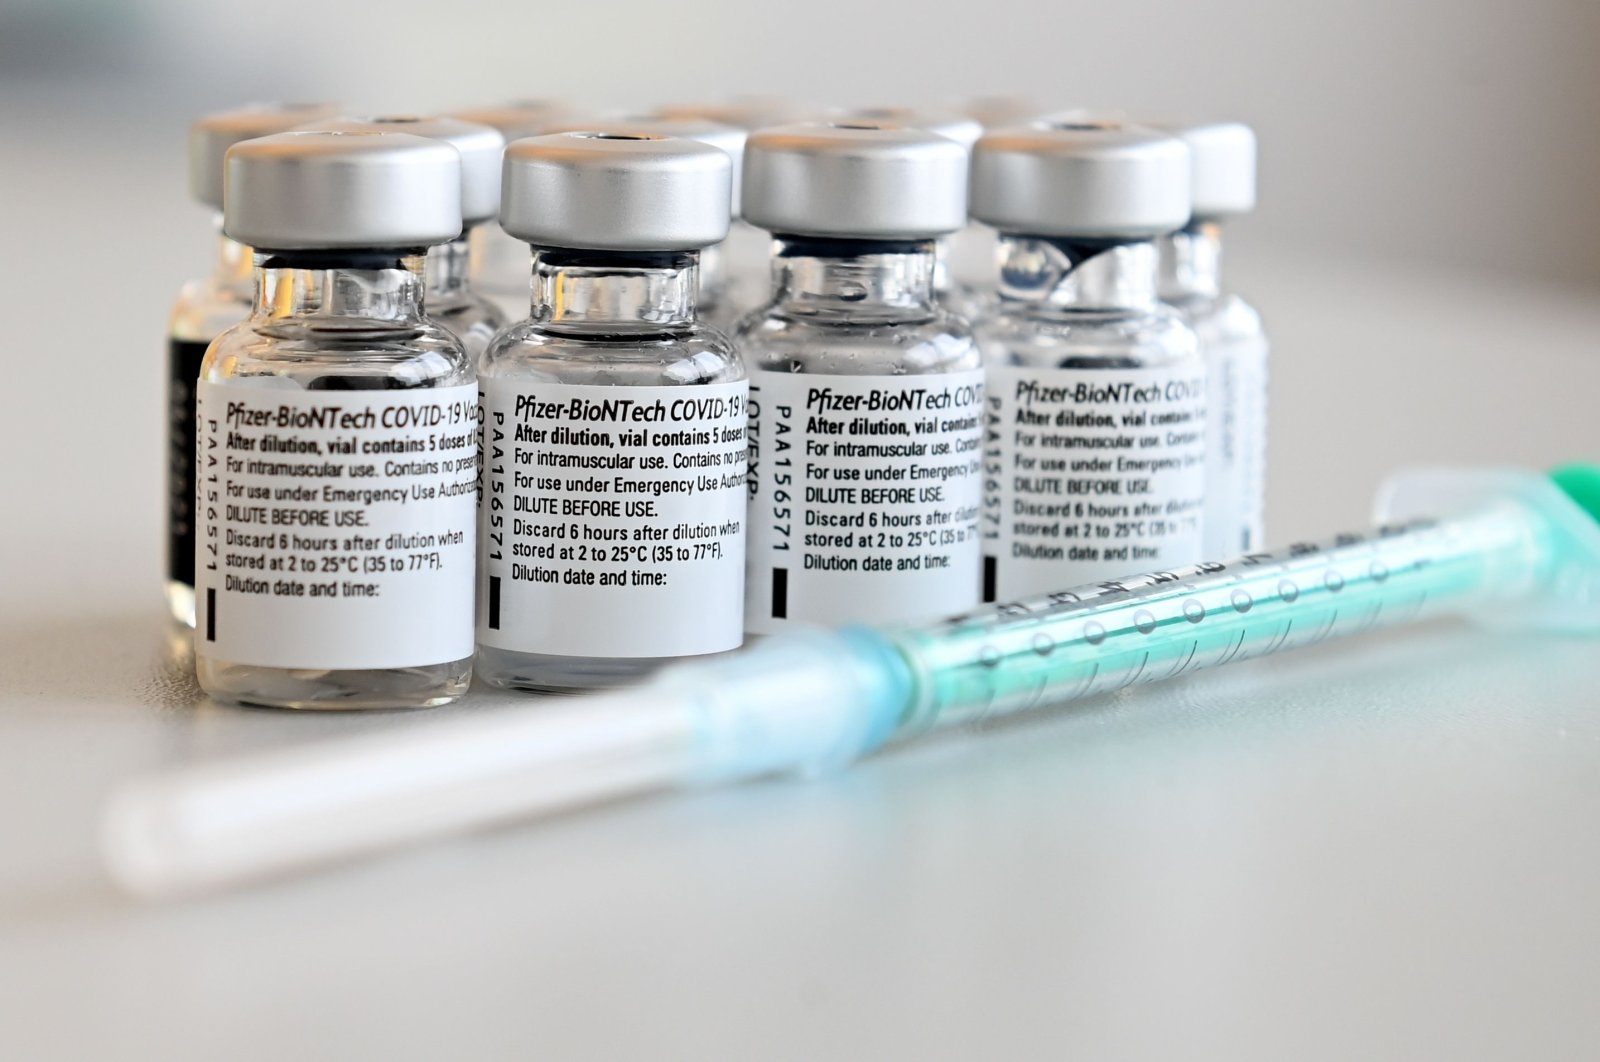 Vials of the Pfizer-BioNTech COVID-19 vaccine at the vaccination center in Pfaffenhofen, southern Germany, Jan. 10, 2021. (AFP Photo)